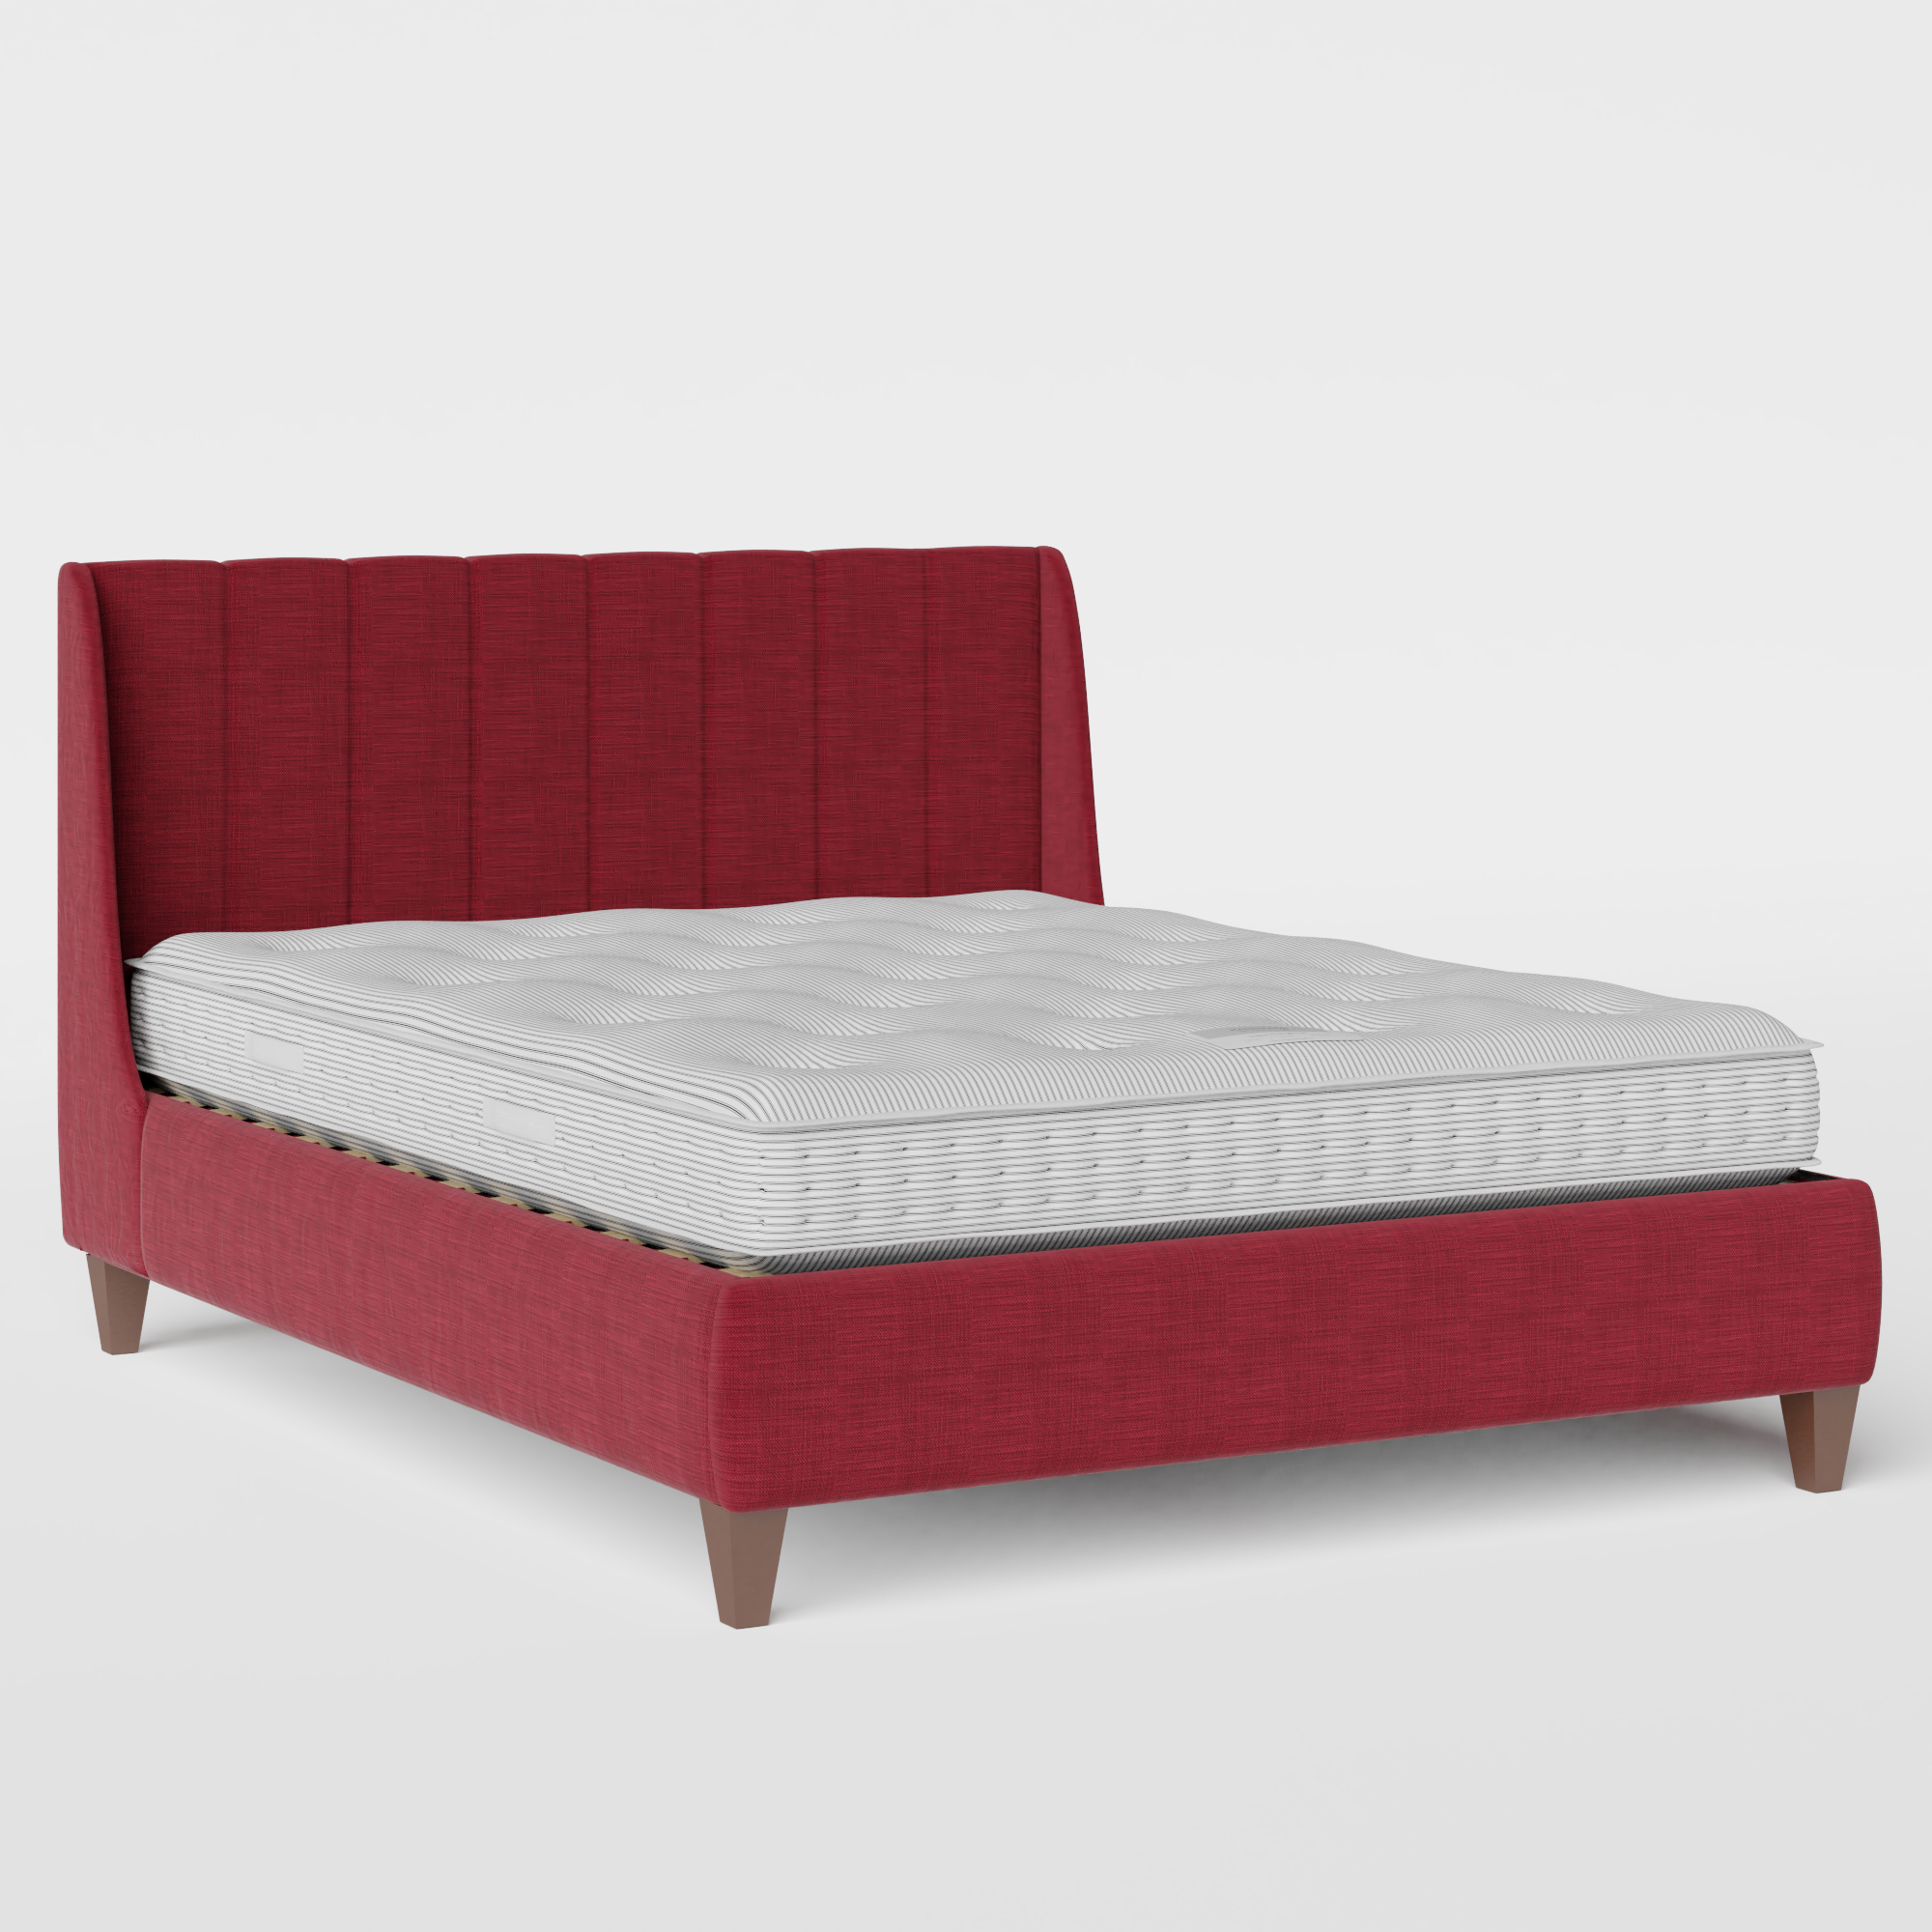 Sunderland Pleated upholstered bed in cherry fabric